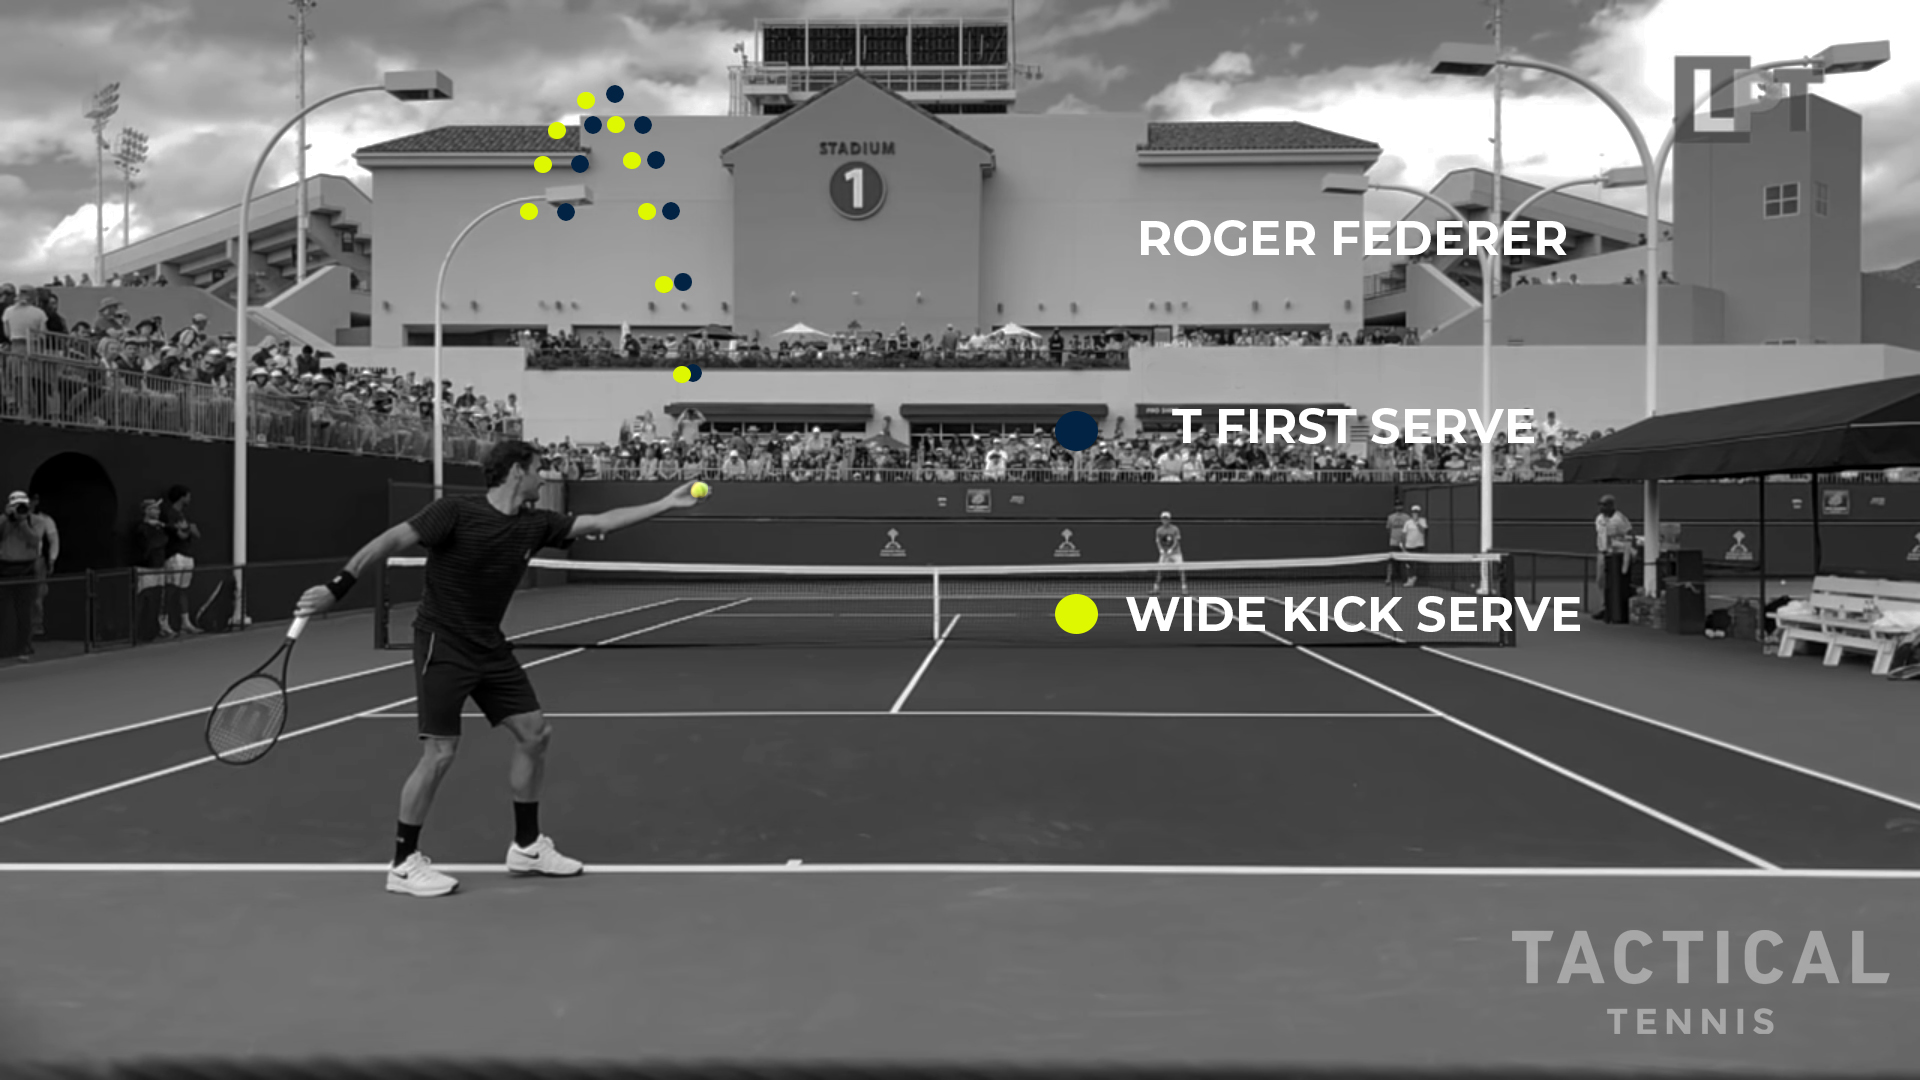 Comparison of Federer's first and second serve ball toss paths